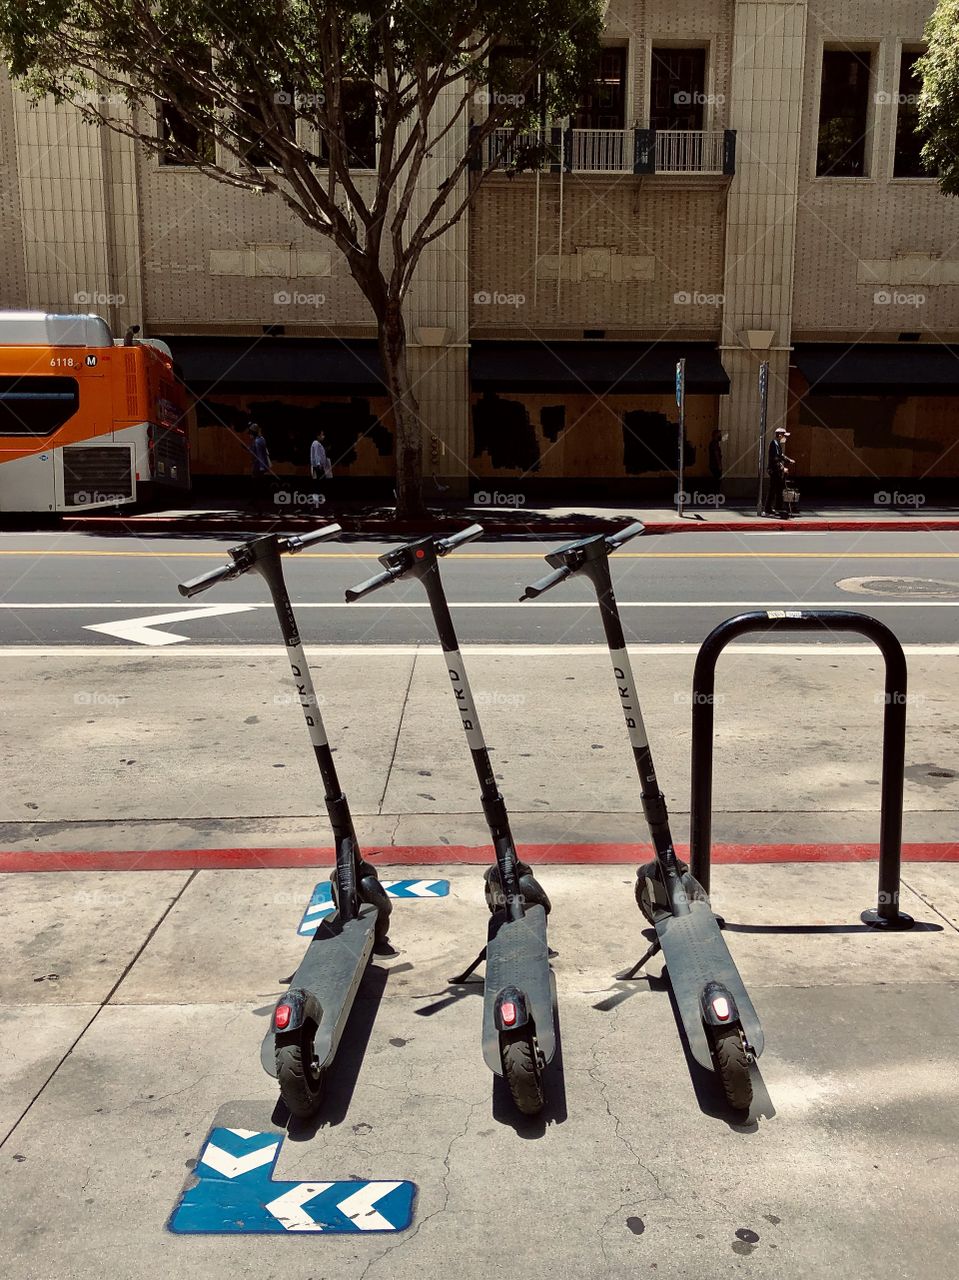 Three electric scooters wait for a rider while parked in a “scooter parking zone” on 7th St in Downtown Los Angeles CA 6.12.2020